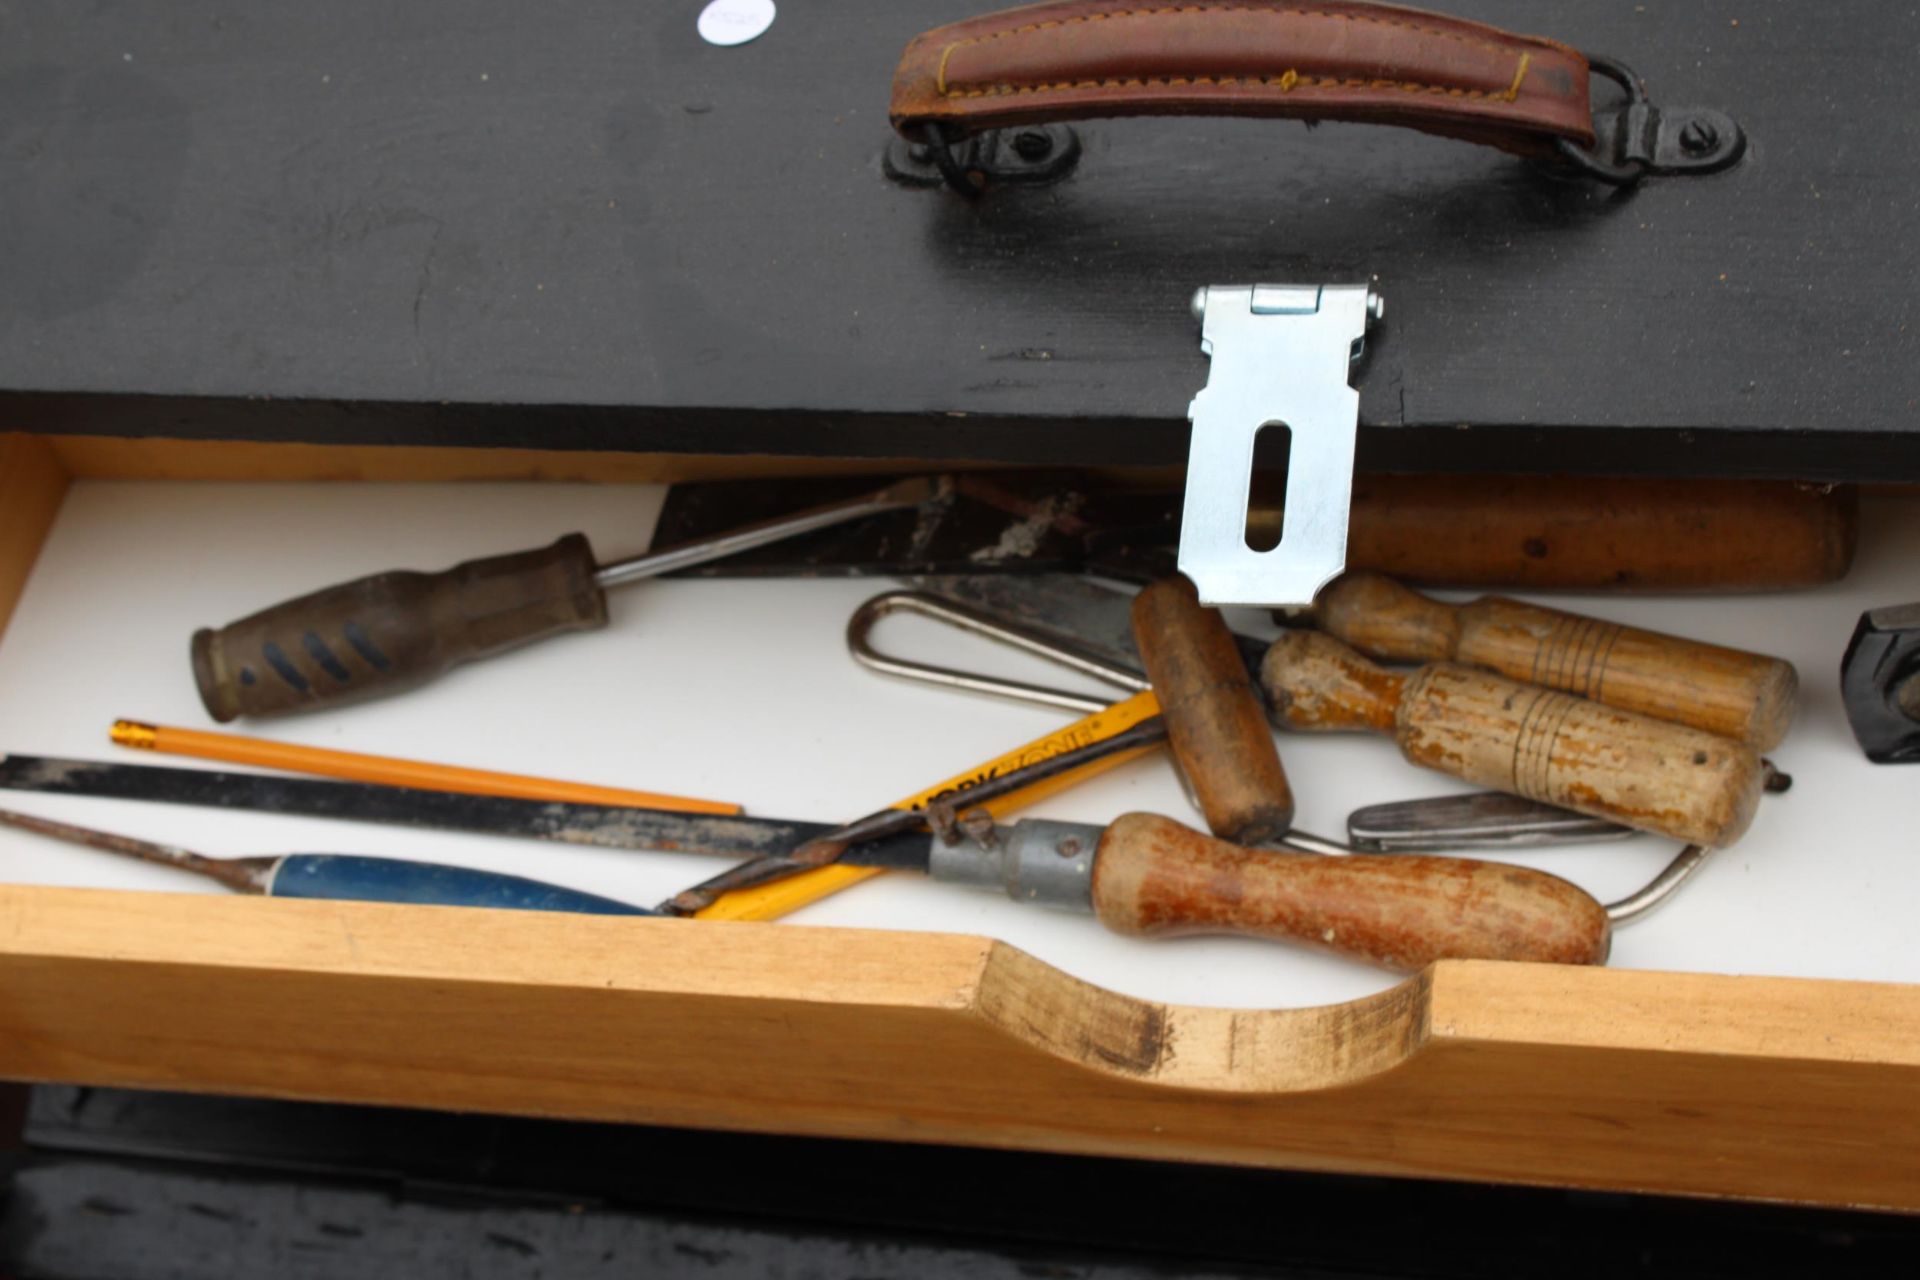 A VINTAGE WOODEN TOOL CHEST WITH AN ASSORTMENT OF TOOLS TO INCLUDE CHISELS AND AN ELECTRIC SANDER - Image 3 of 4